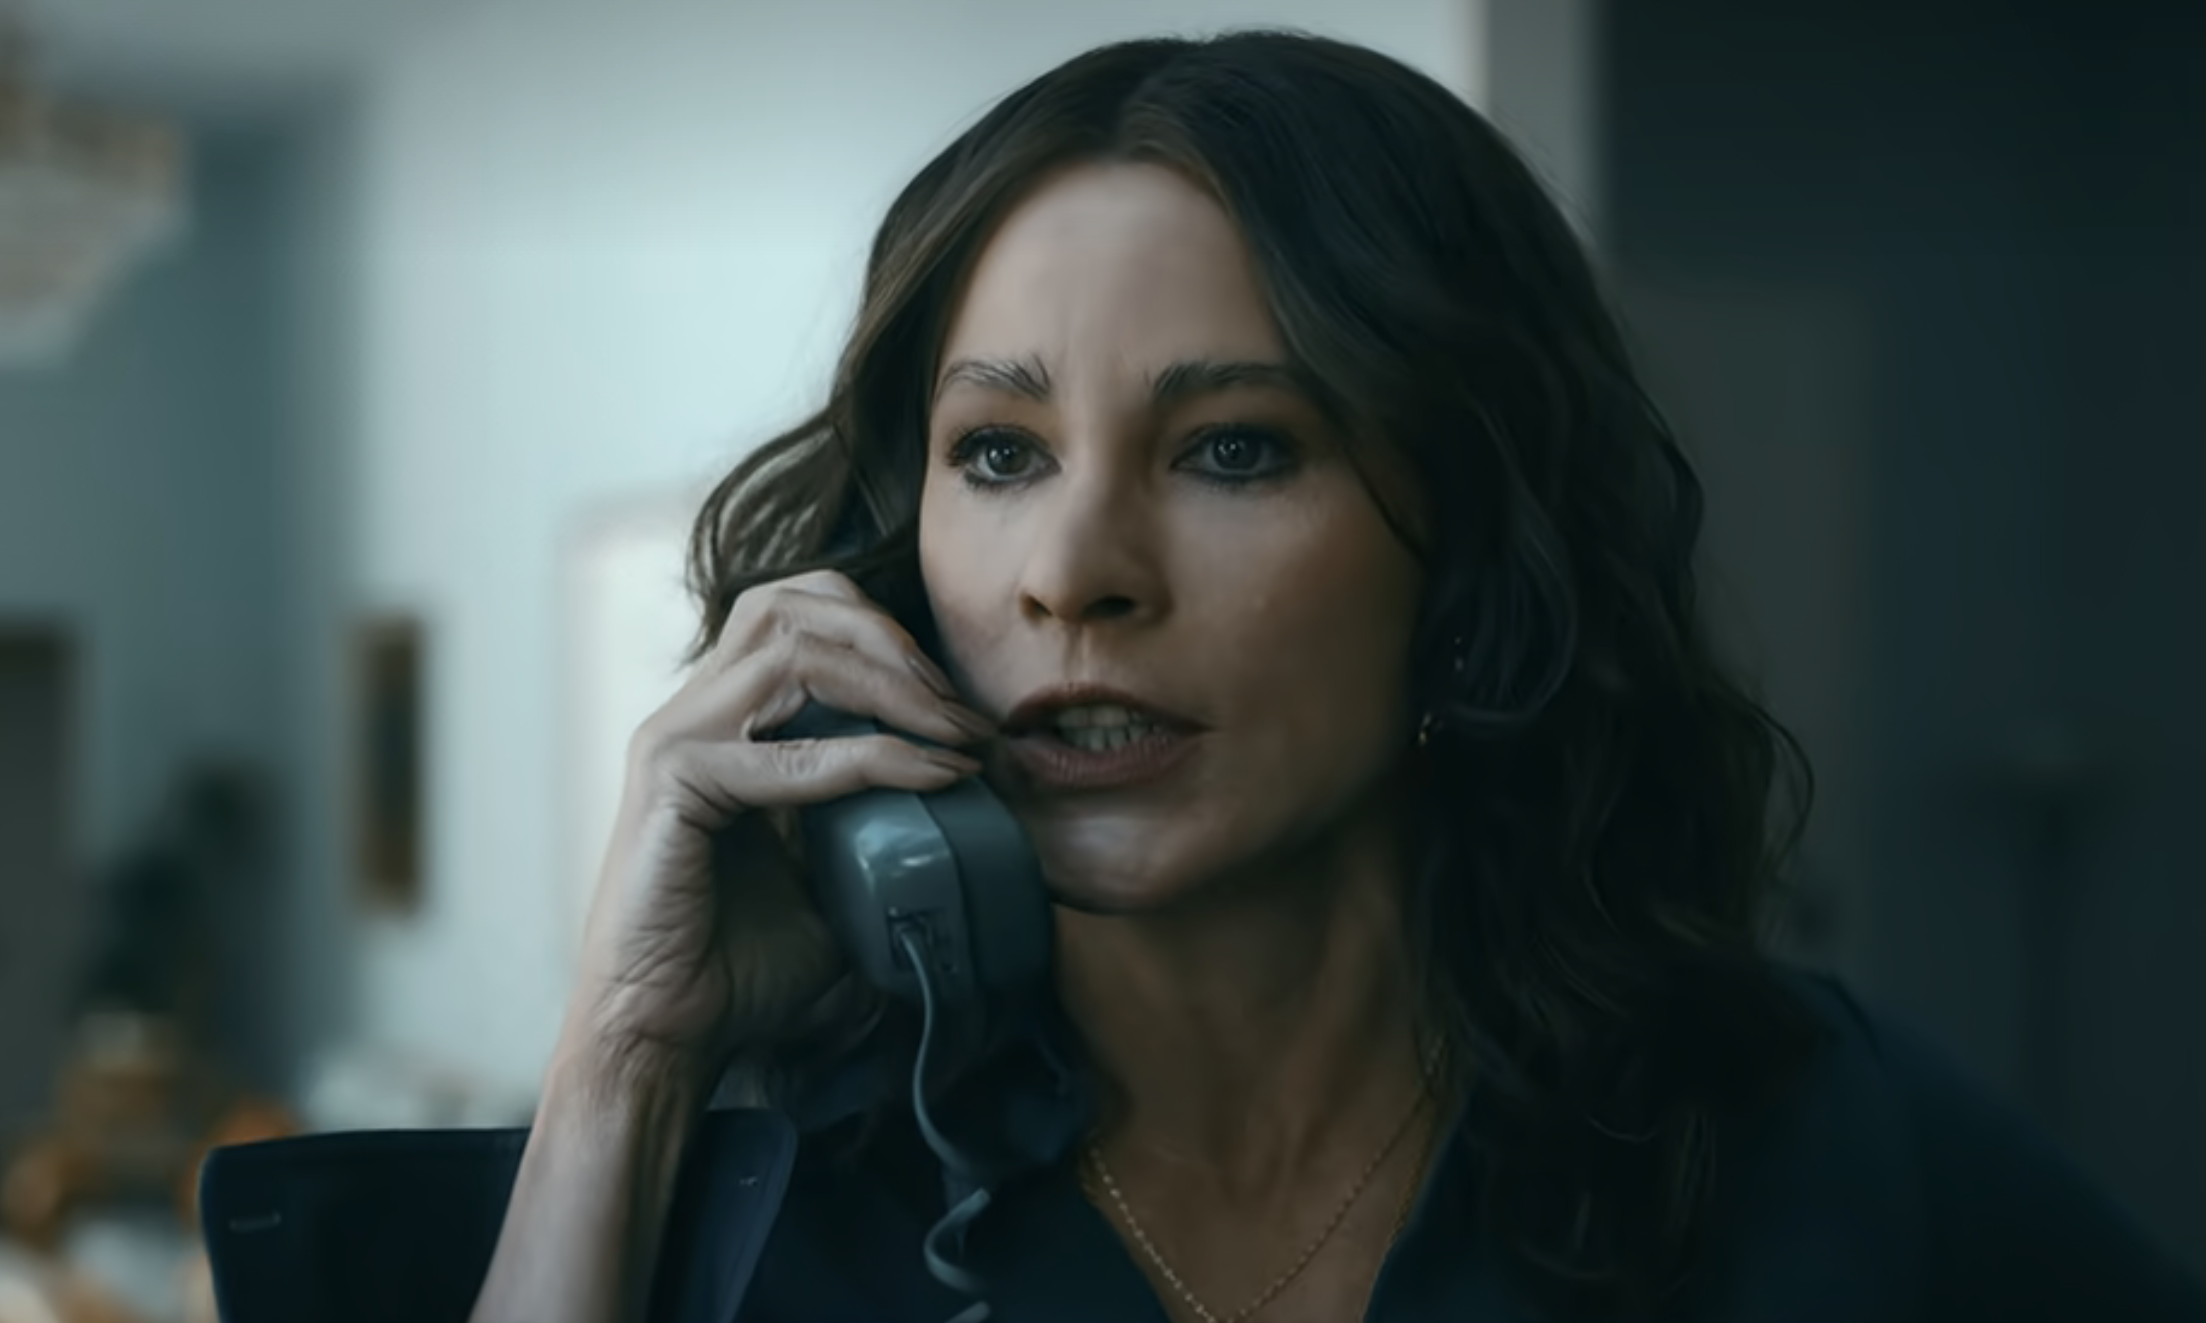 Close-up of Sofía as Griselda on the phone